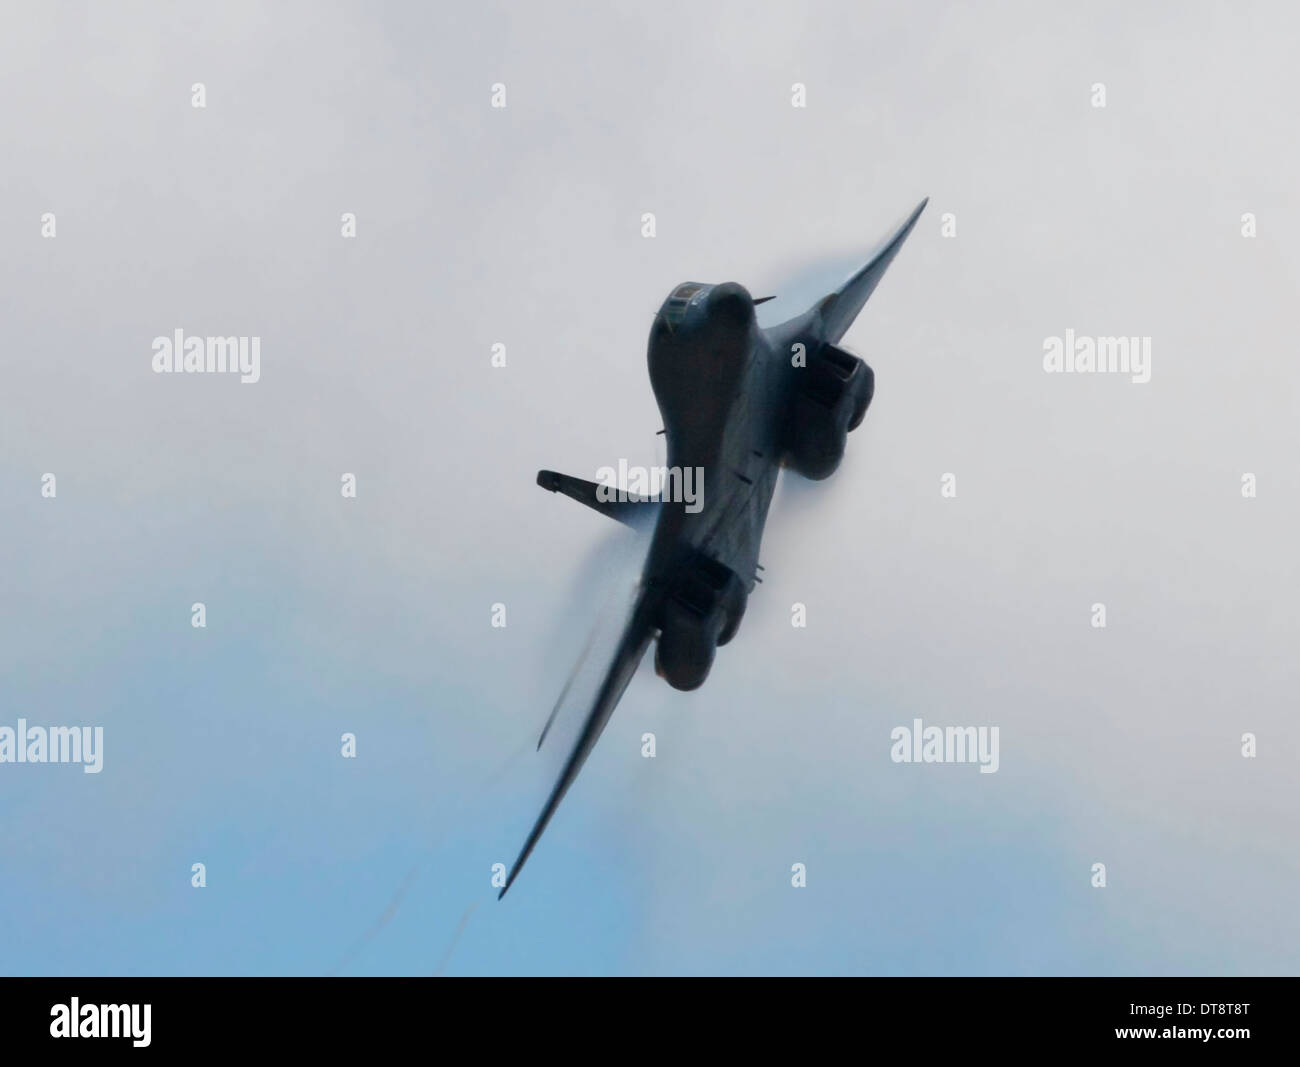 Rockwell B1 Bomber on very fast fly-by with water vapor shock wave on wings. Stock Photo